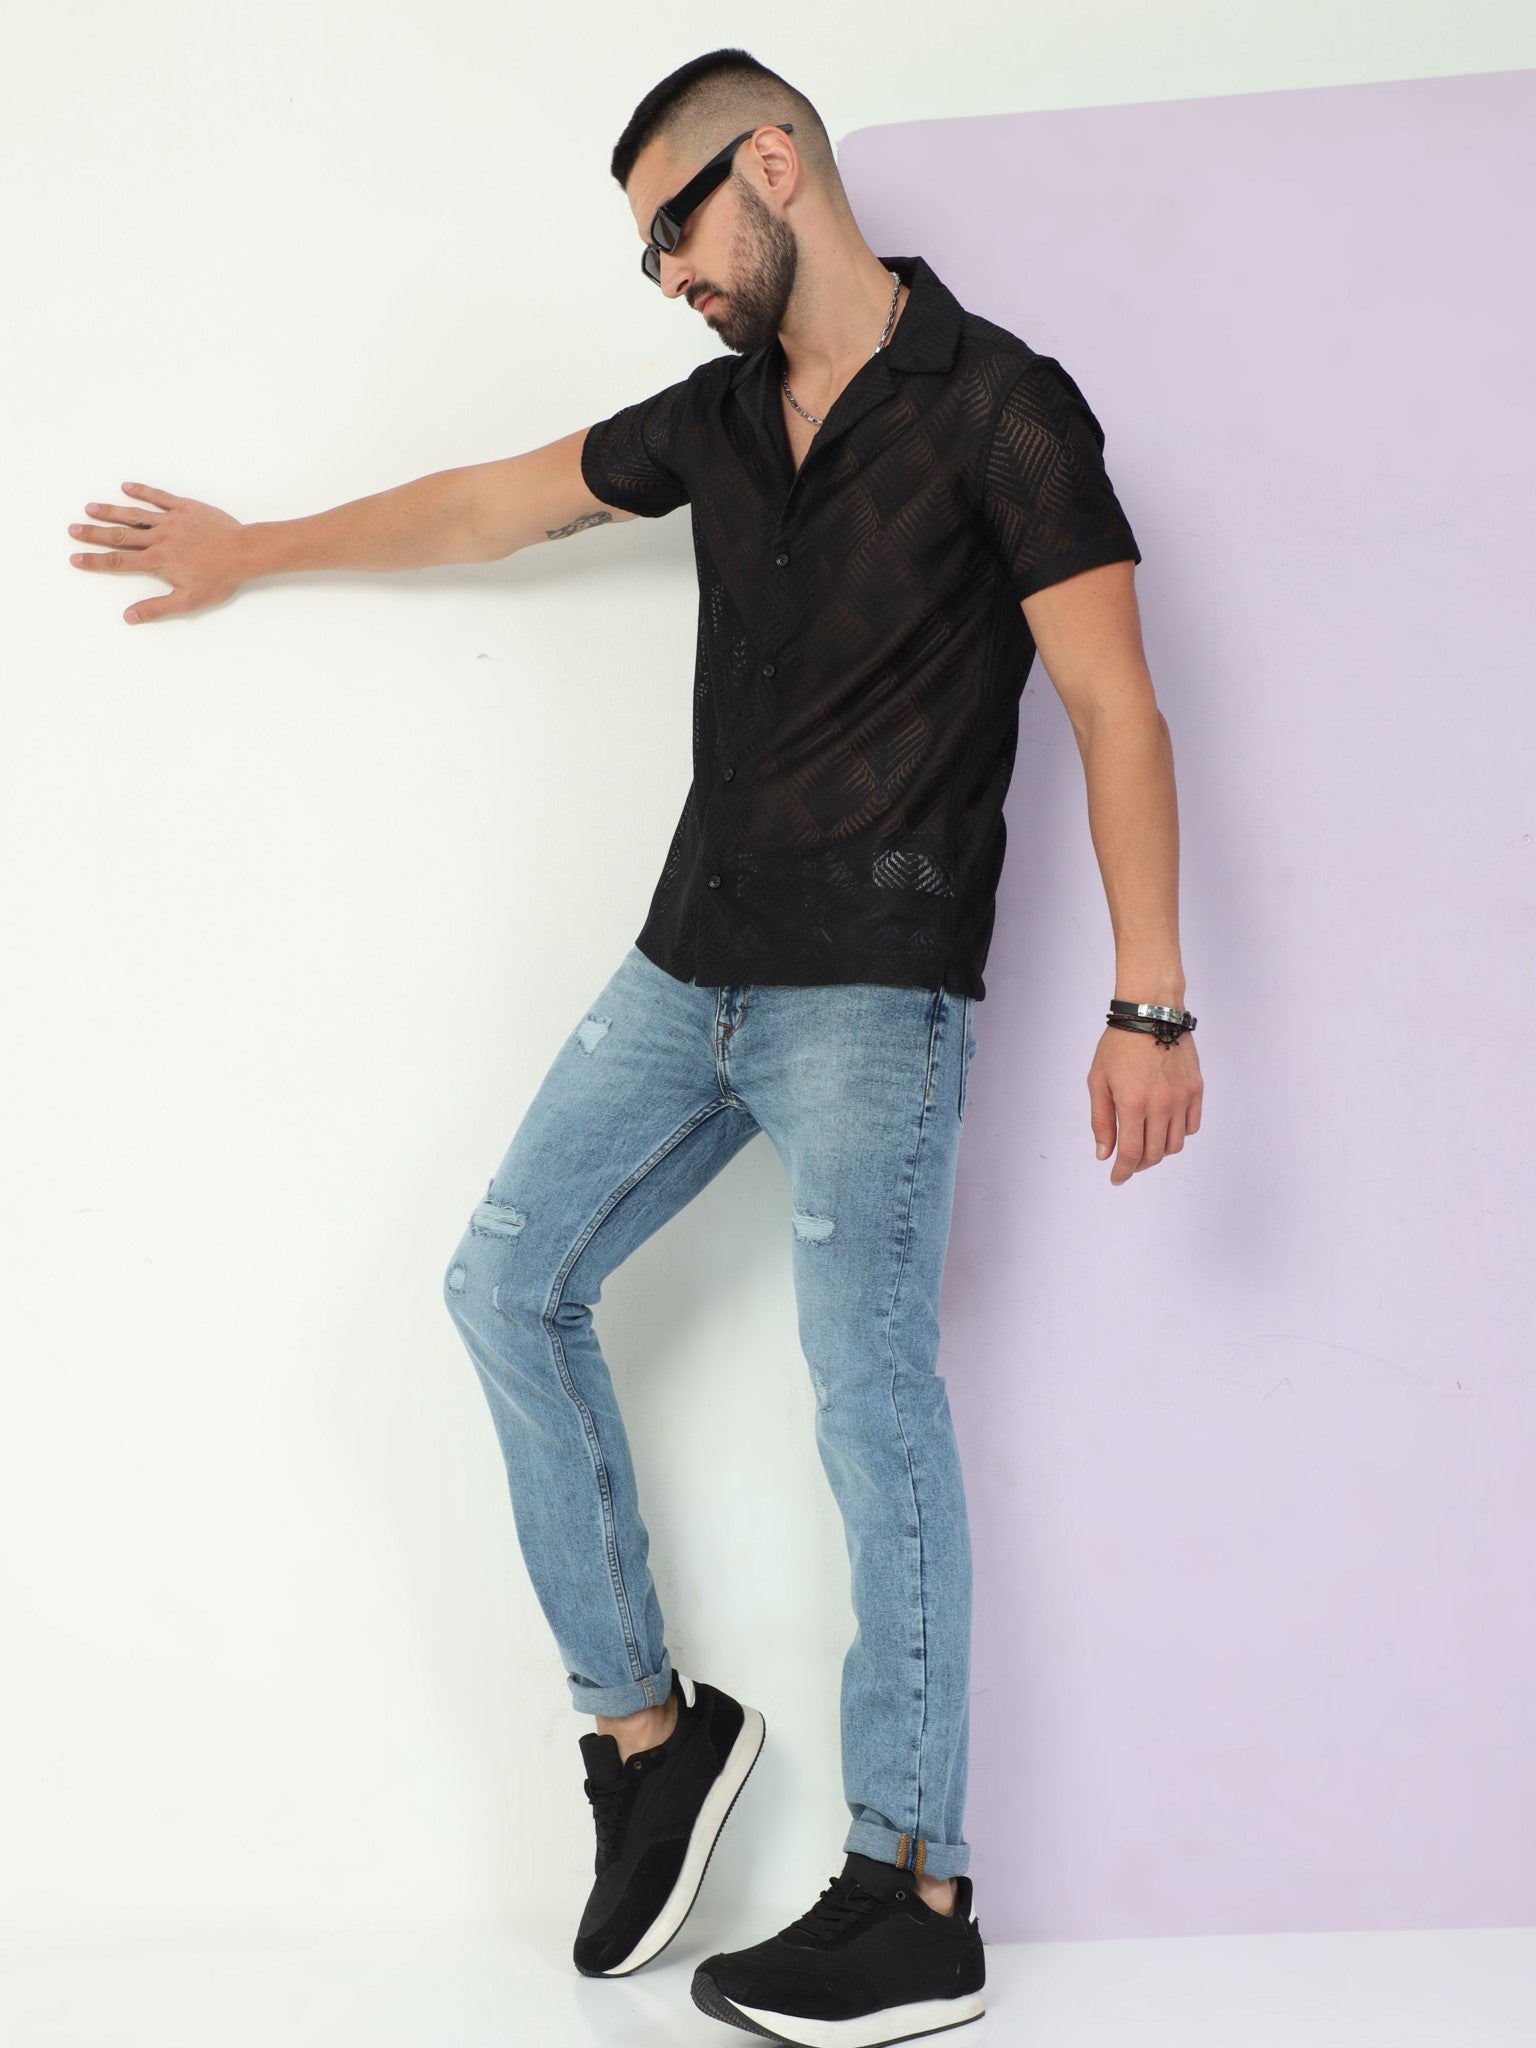 Midblue Distressed Slim Fit Jeans for Men